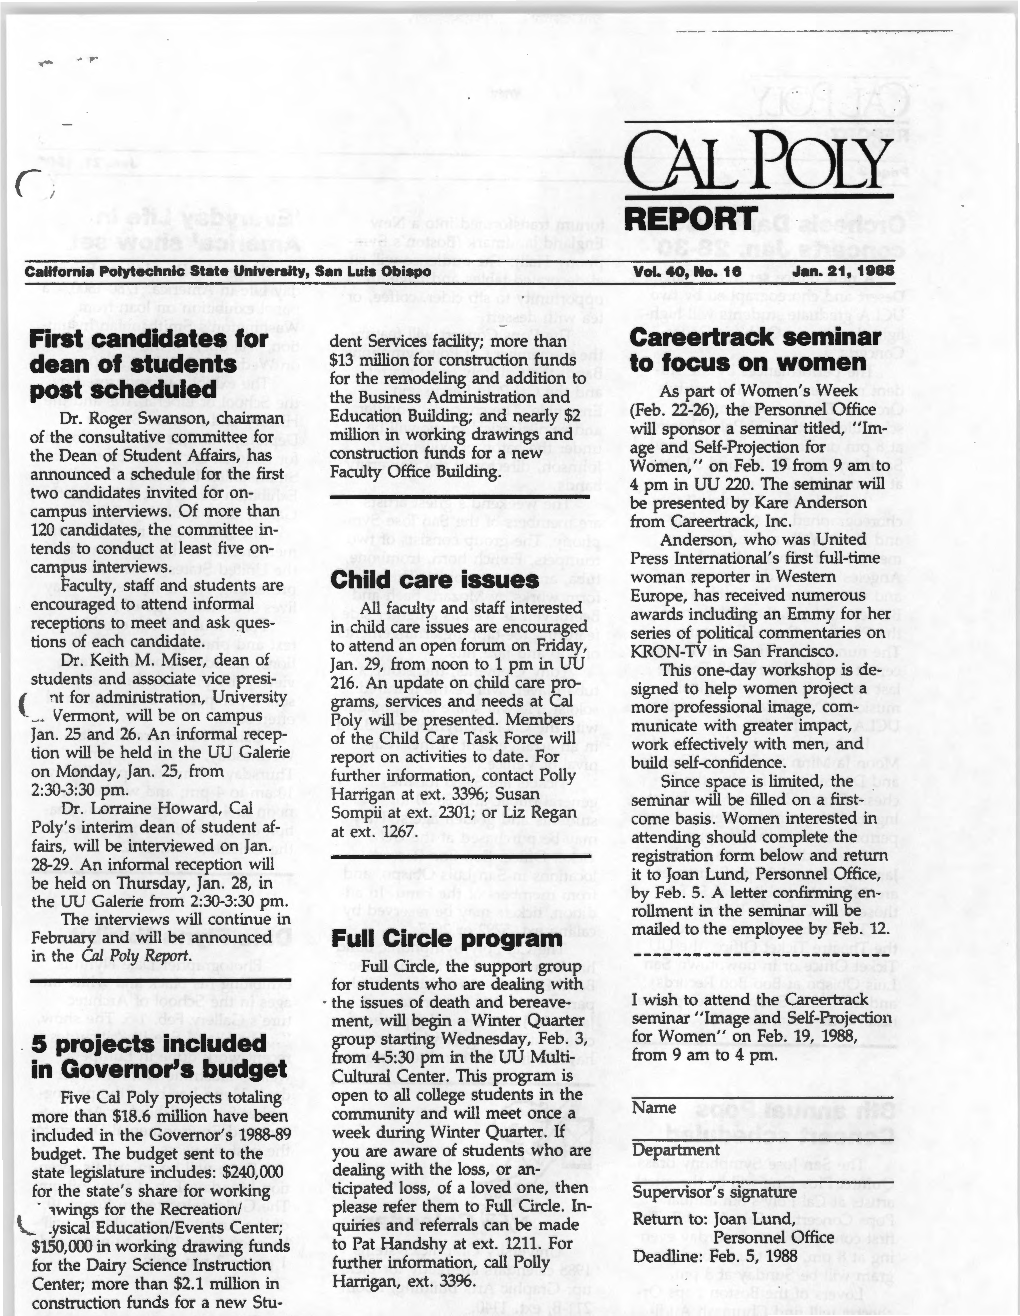 January 21, 1988 Cal Poly Report